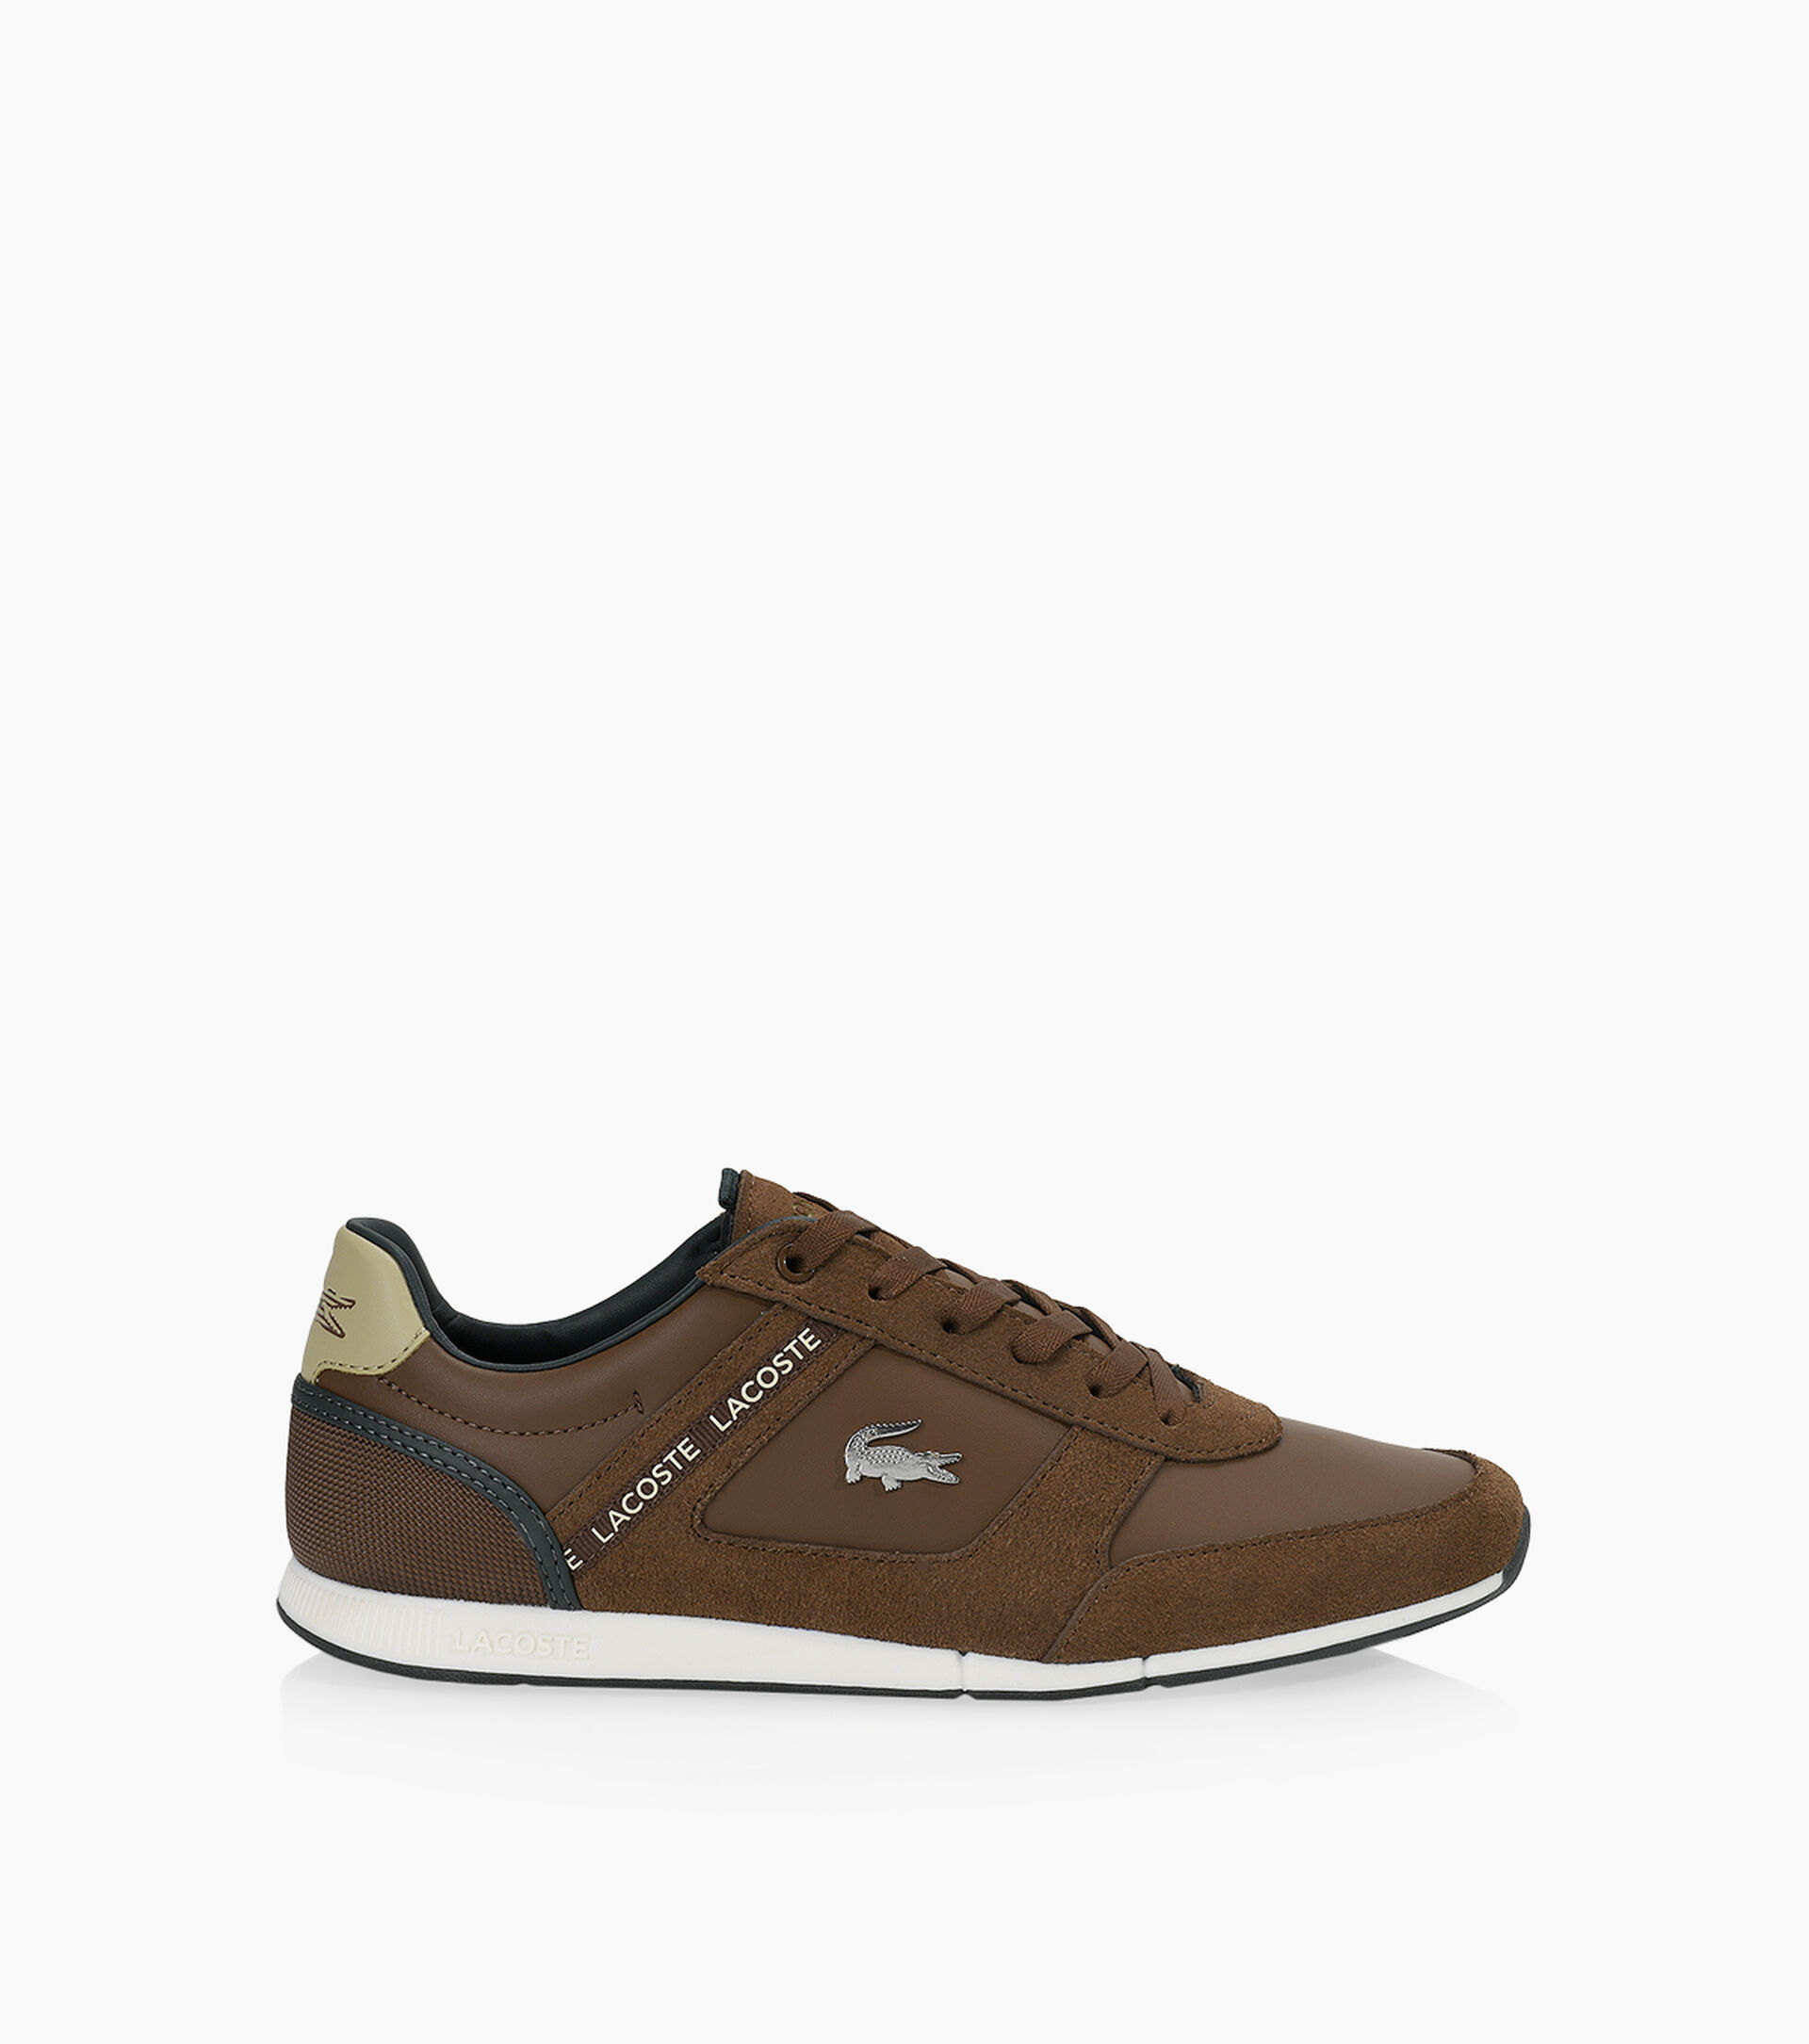 LACOSTE MENERVA SPORT - Leather | Browns Shoes